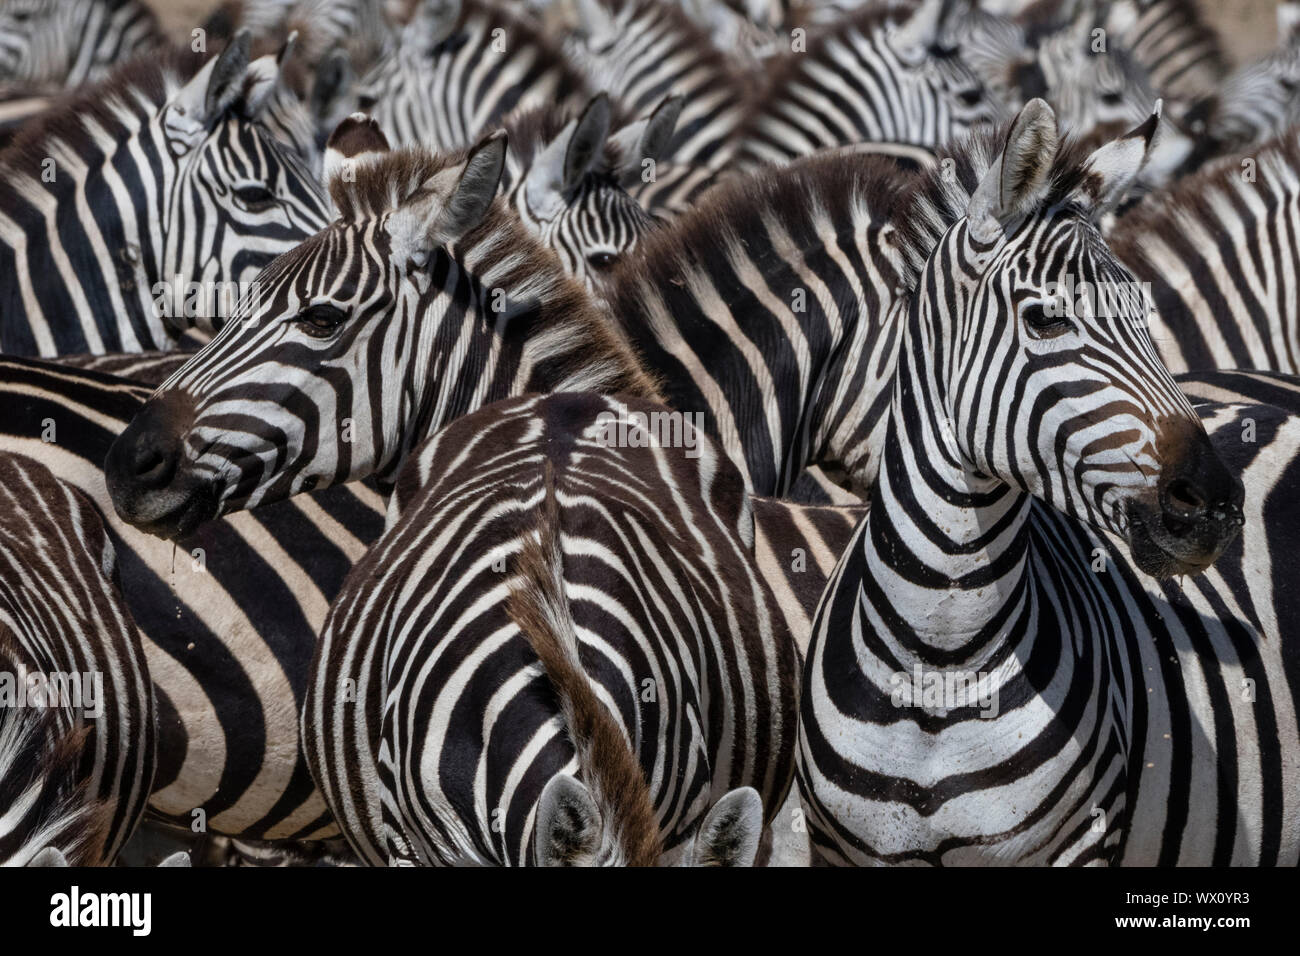 A herd of plains zebras (Equus quagga) in the Hidden Valley, Tanzania, East Africa, Africa Stock Photo